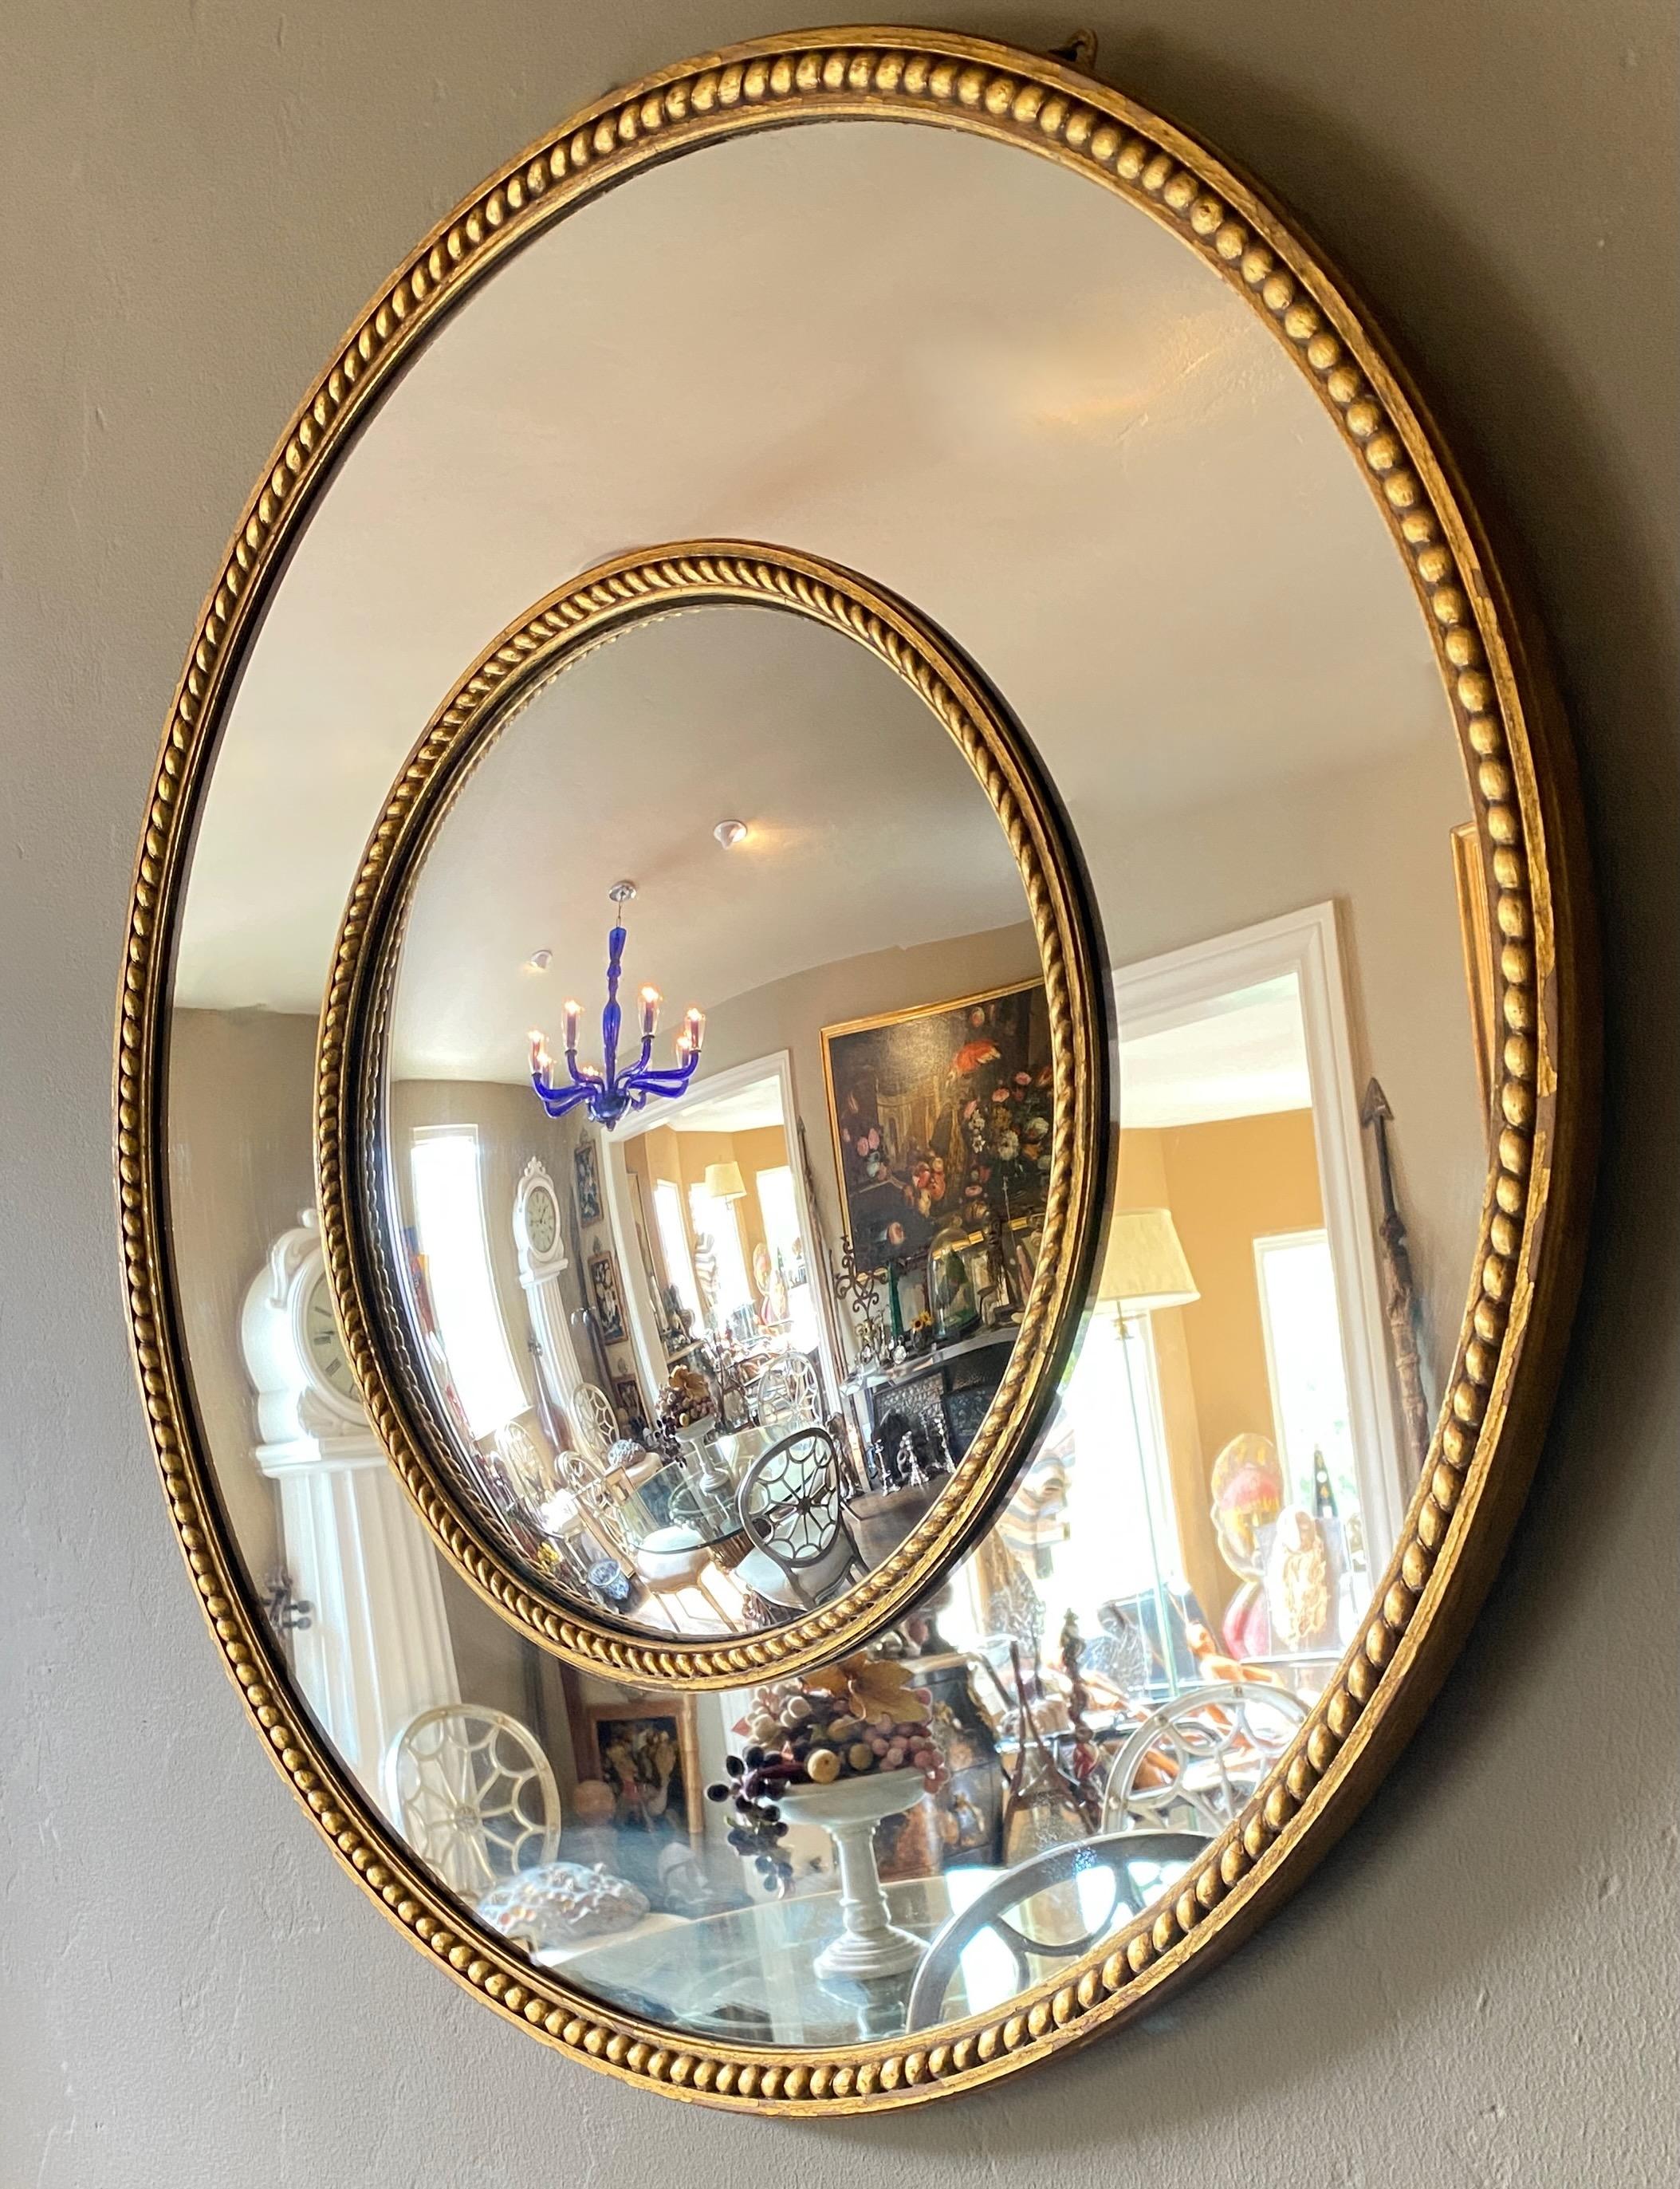 A mid century wood and gesso gold frame convex mirror. Center is convex with the side panels being flat mirror.
In excellent vintage condition.
American 1950's-1960's.